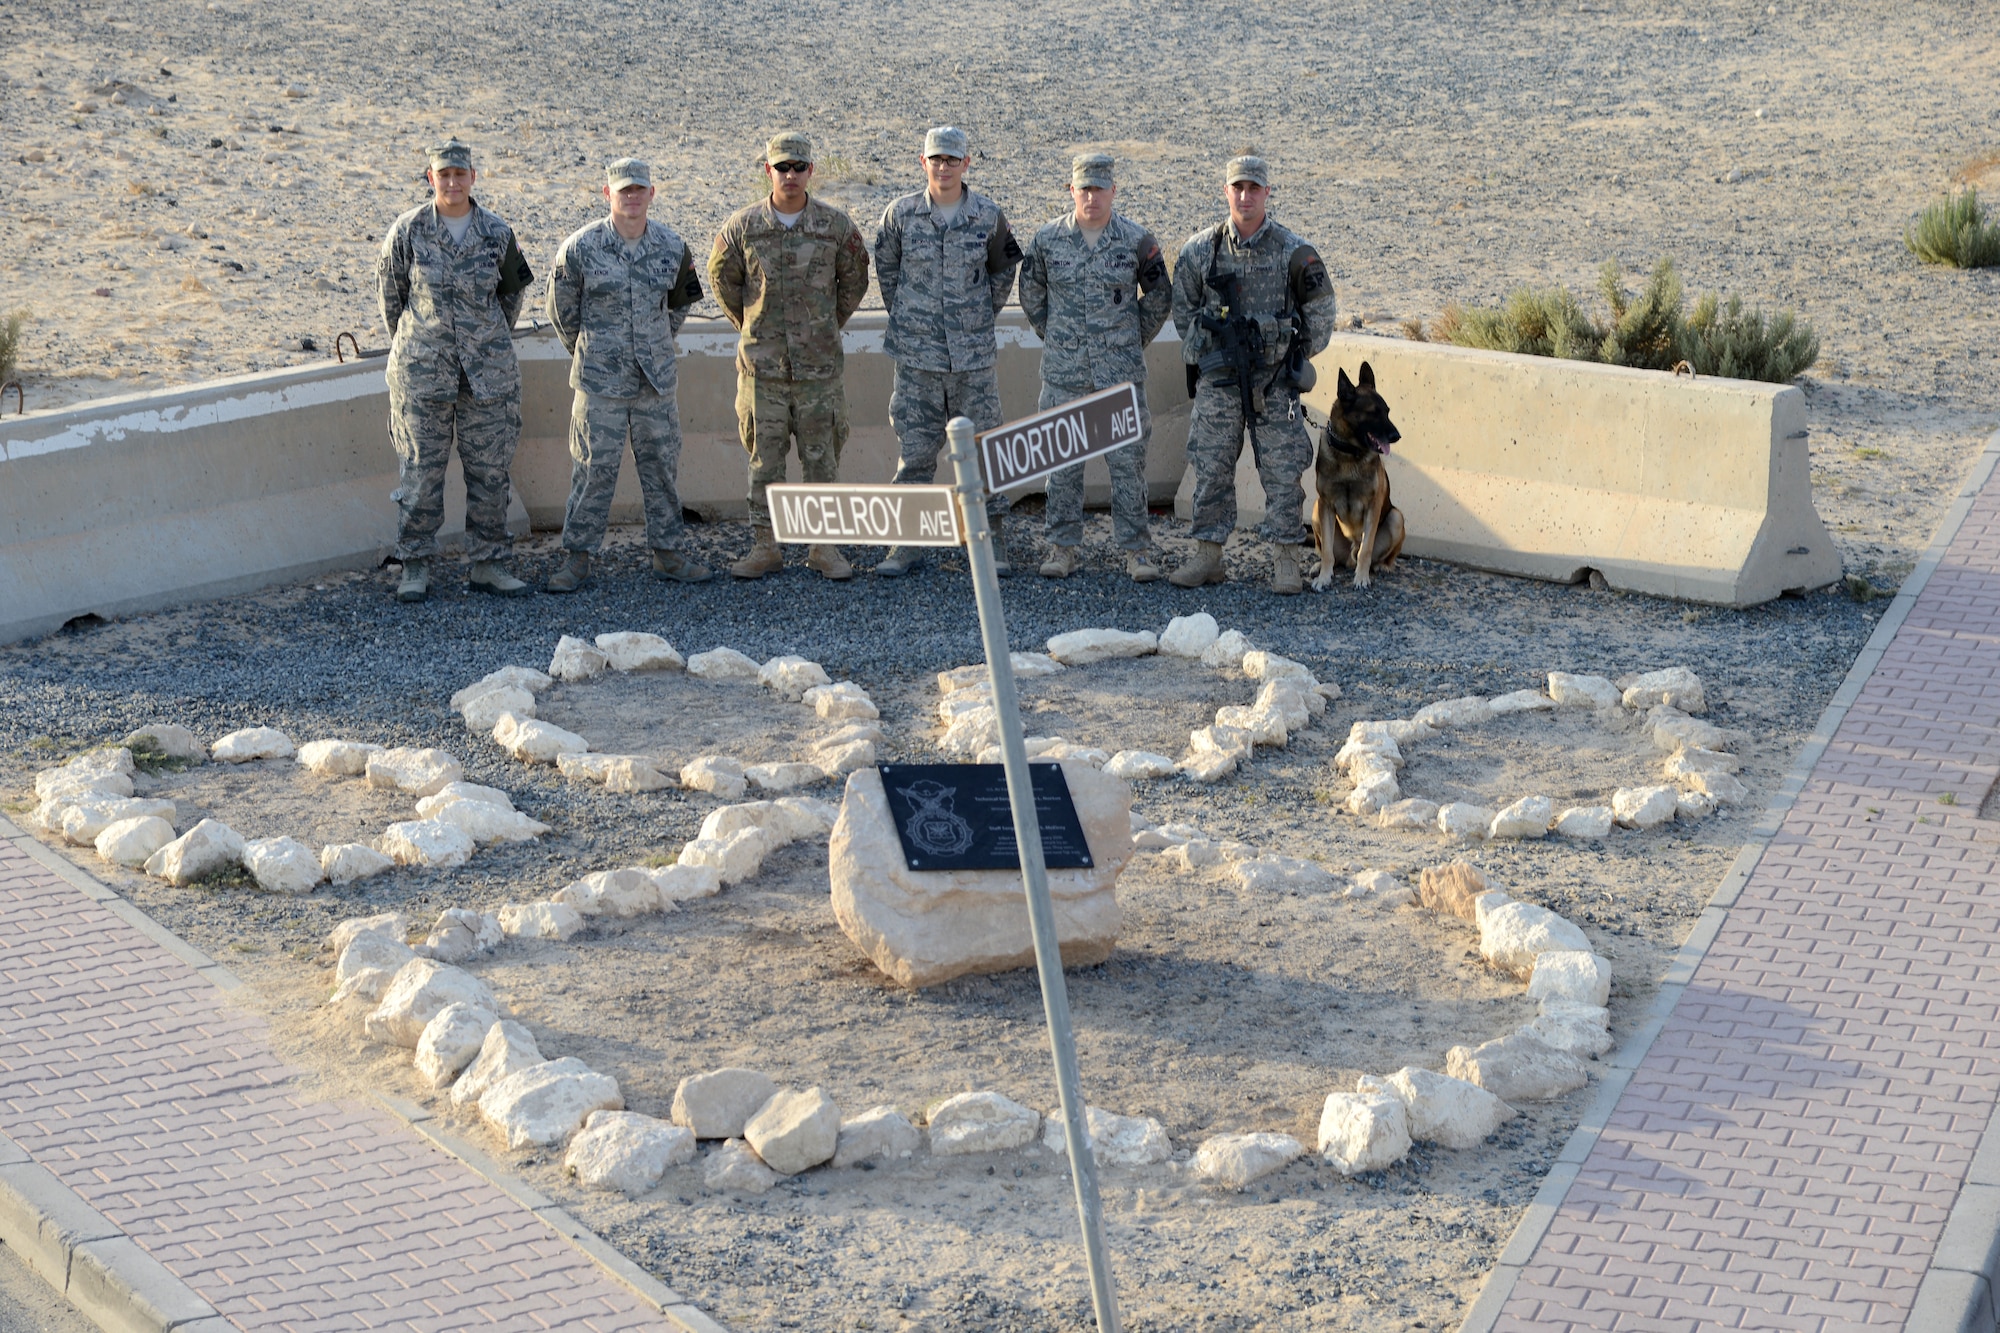 SOUTHWEST ASIA - Airmen from the 386th Expeditionary Security Forces Squadron stand behind the rebuilt Security Forces K9 memorial here Dec. 28, 2014. The original memorial, dedicated to Tech. Sgt. Jason L. Norton and Staff Sgt. Brian McElroy, was damaged in a vehicle accident in September. (U.S. Air Force photo by Tech. Sgt. Jared Marquis/released)